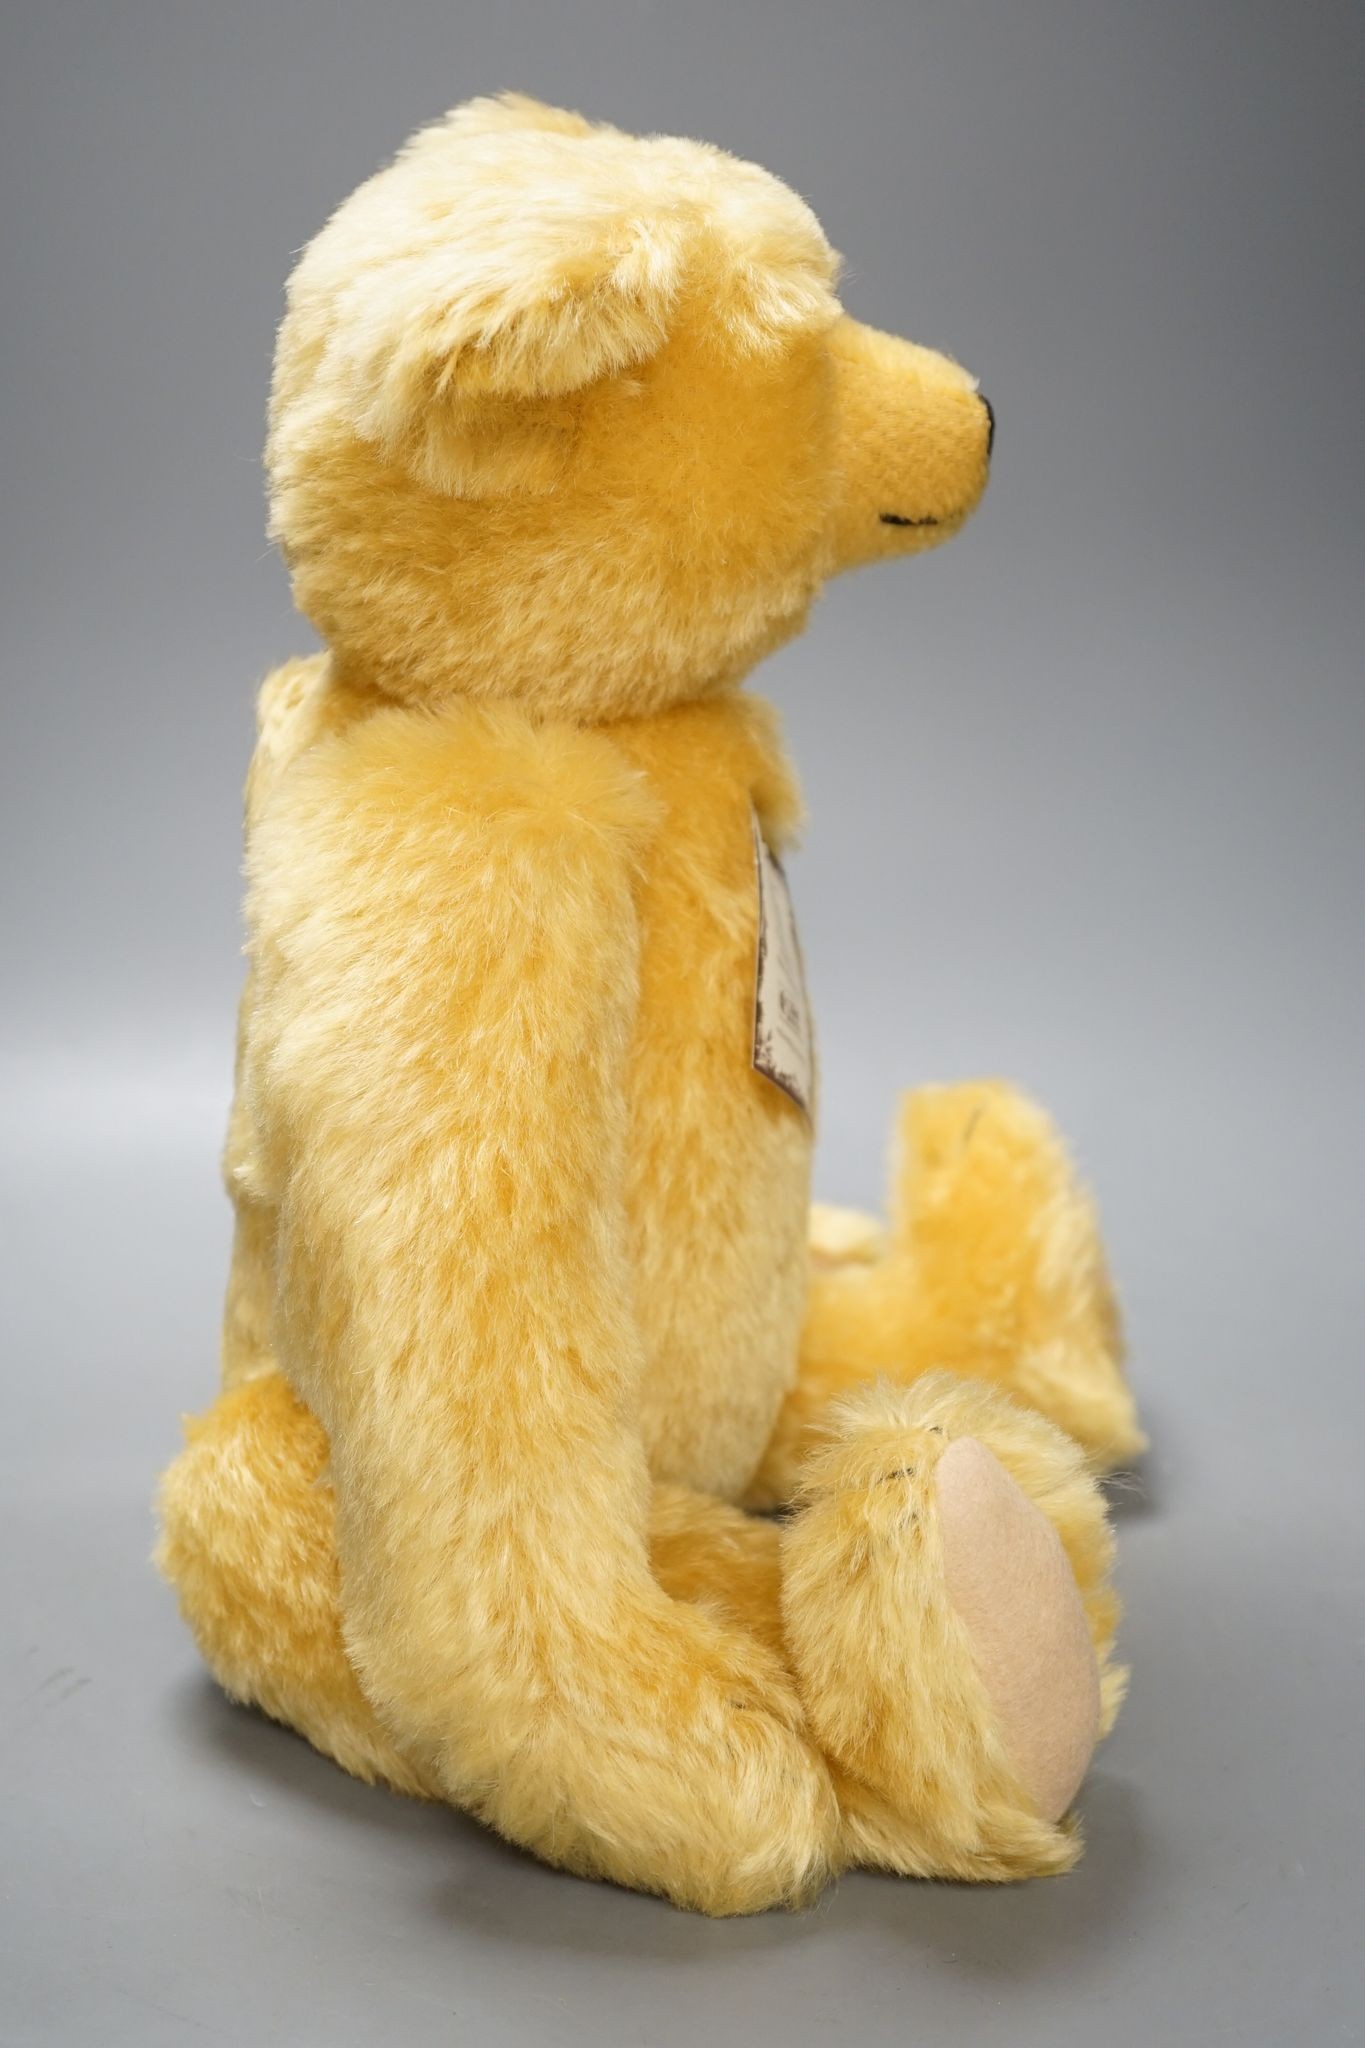 Steiff for British Collectors teddy bear, 2001, with box and certificate Limited Edition 45cm